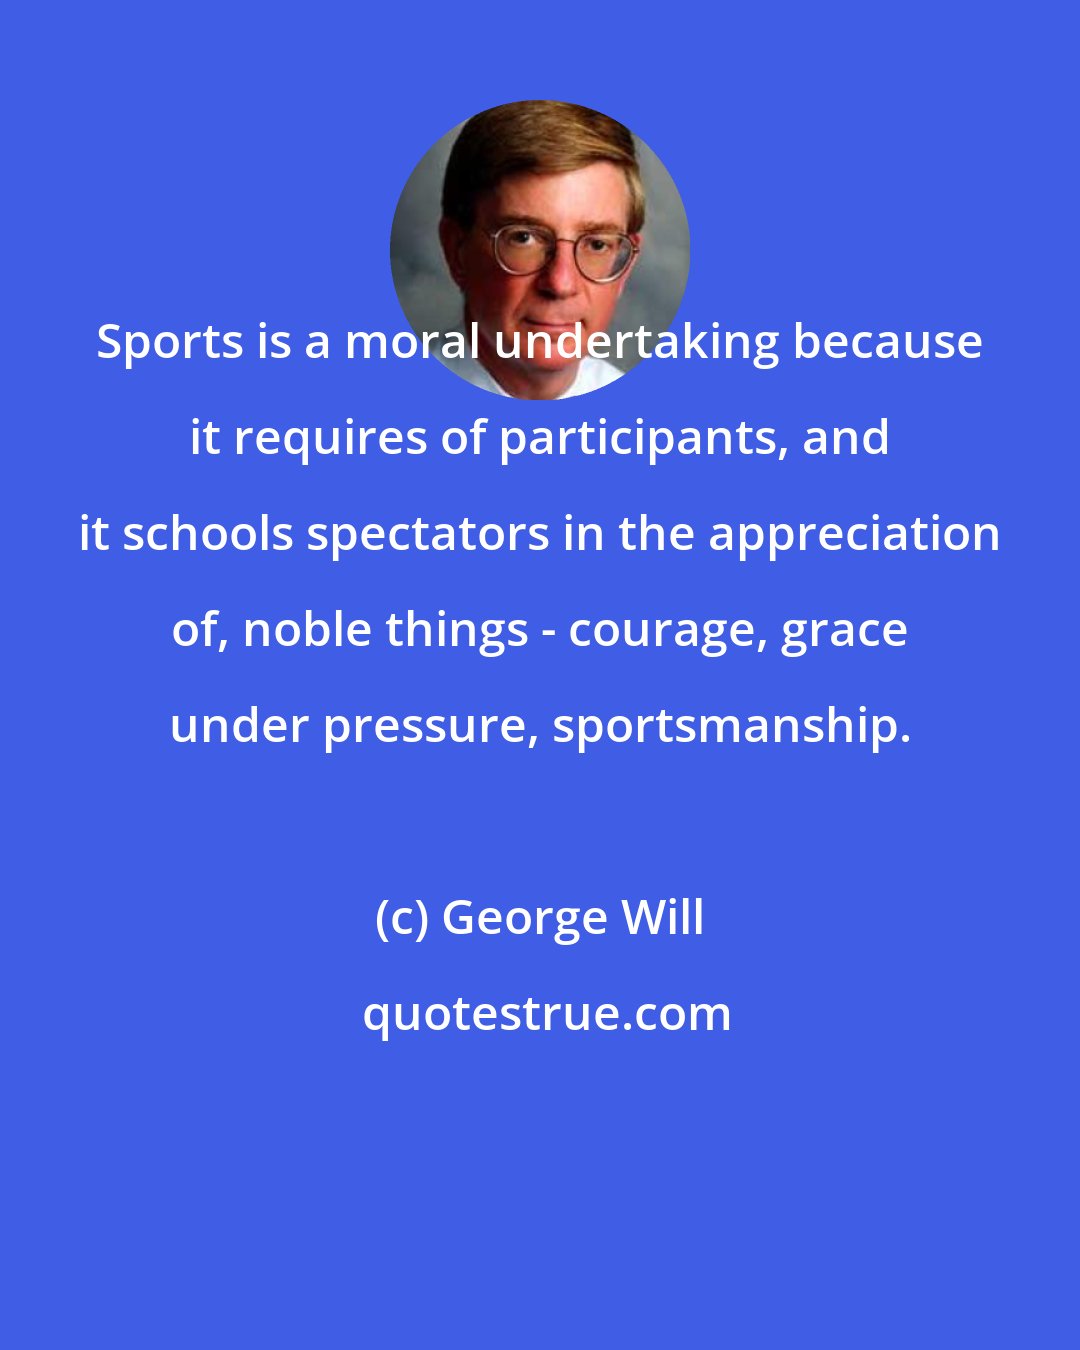 George Will: Sports is a moral undertaking because it requires of participants, and it schools spectators in the appreciation of, noble things - courage, grace under pressure, sportsmanship.